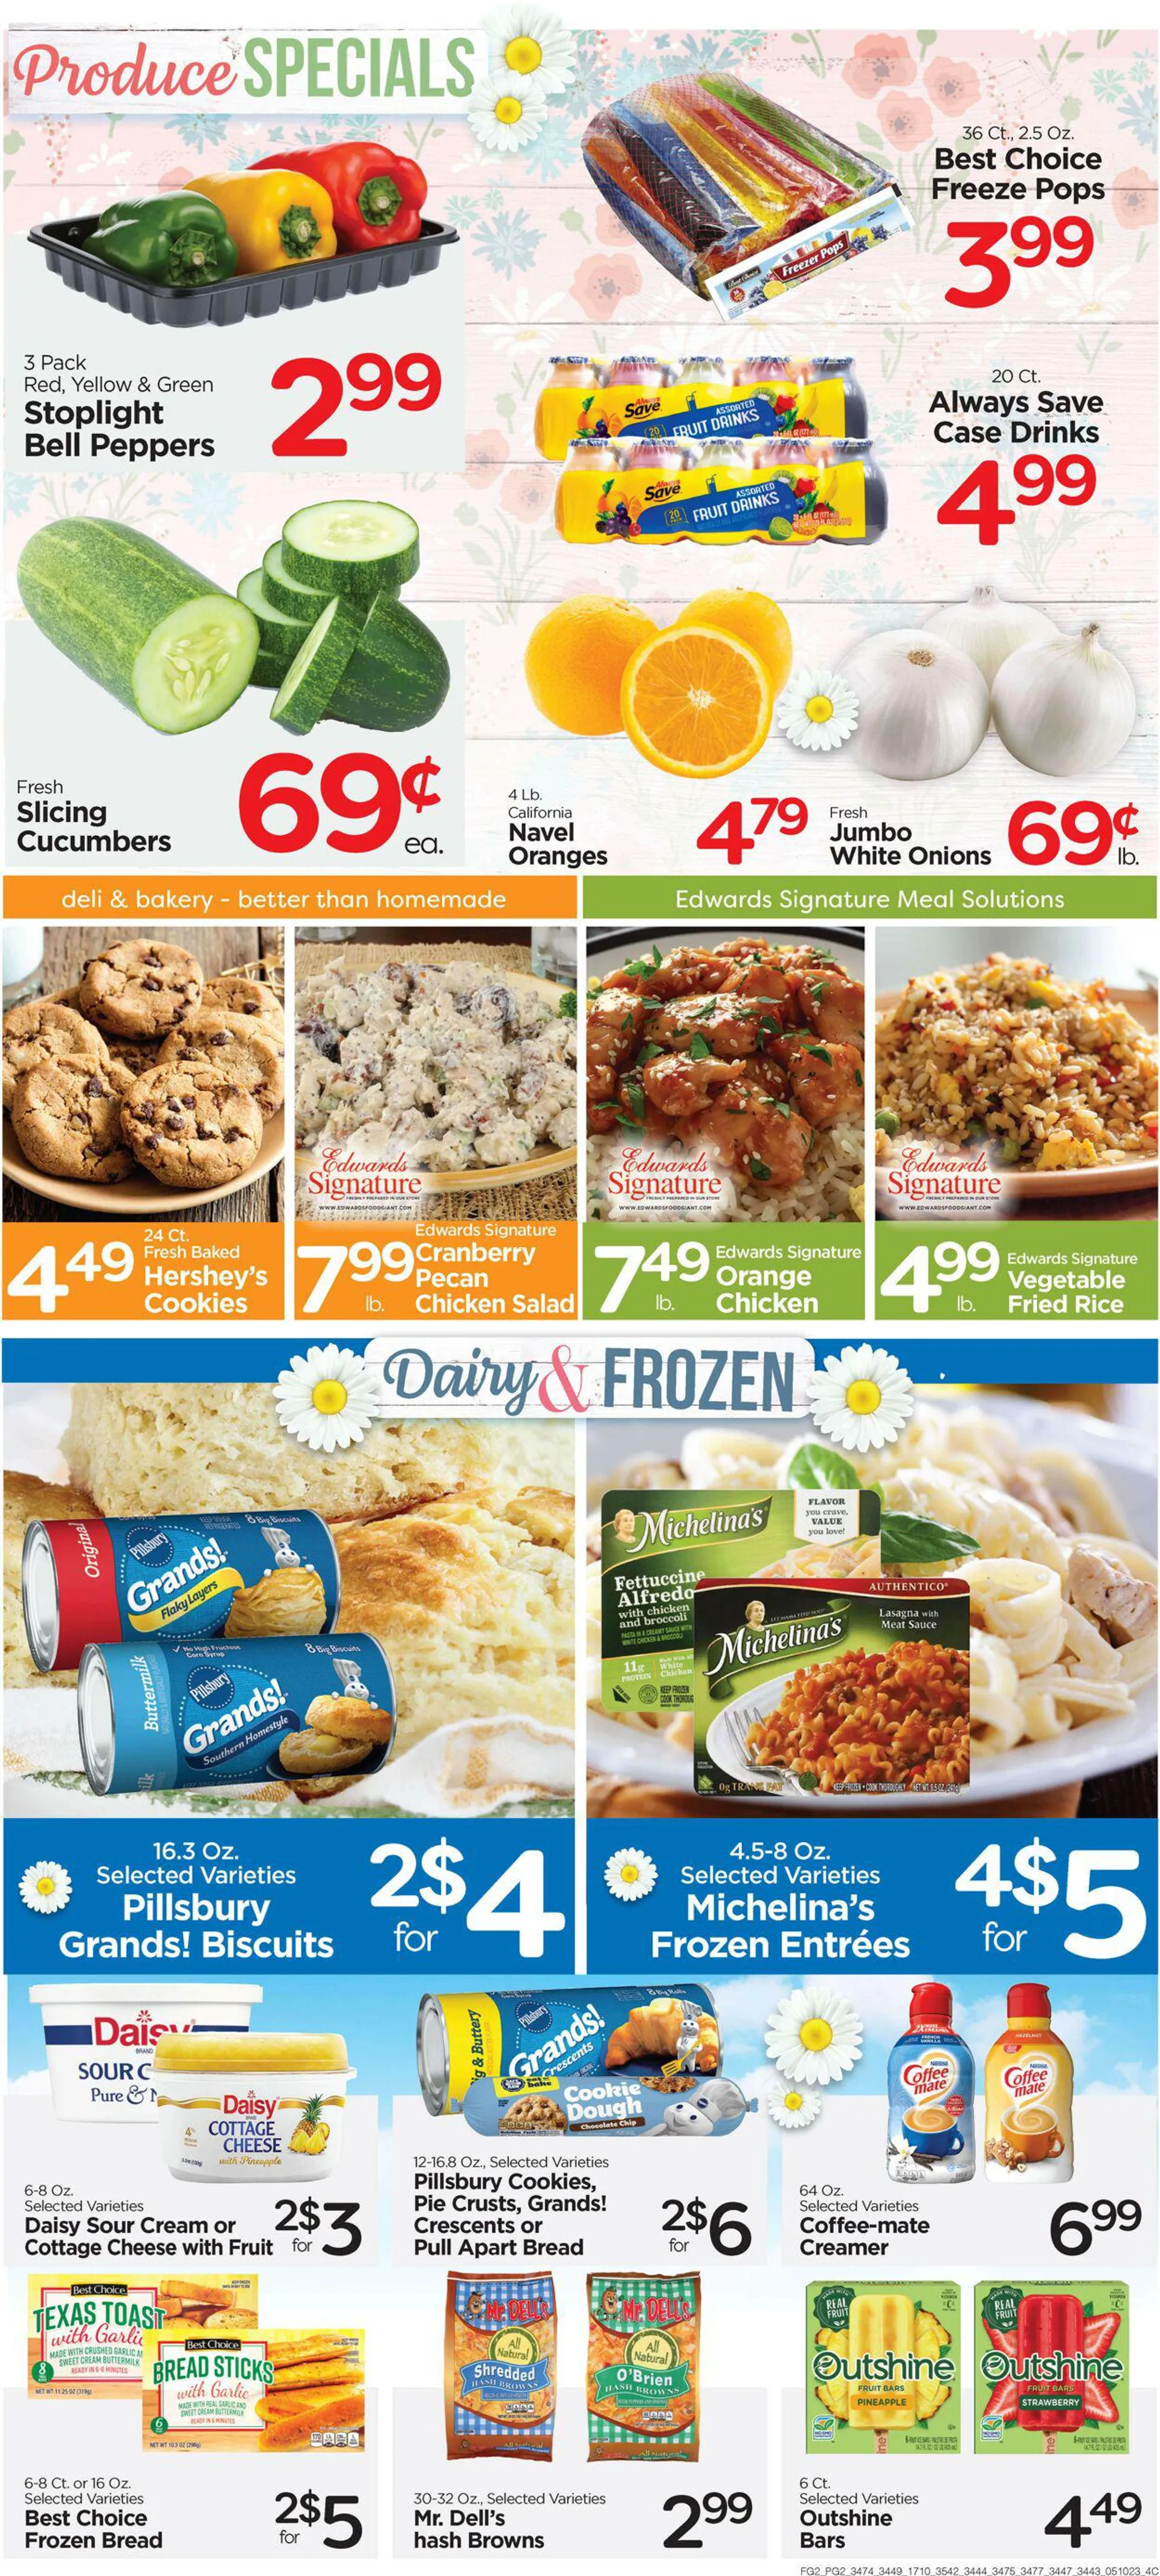 Edwards Food Giant Current weekly ad - 2